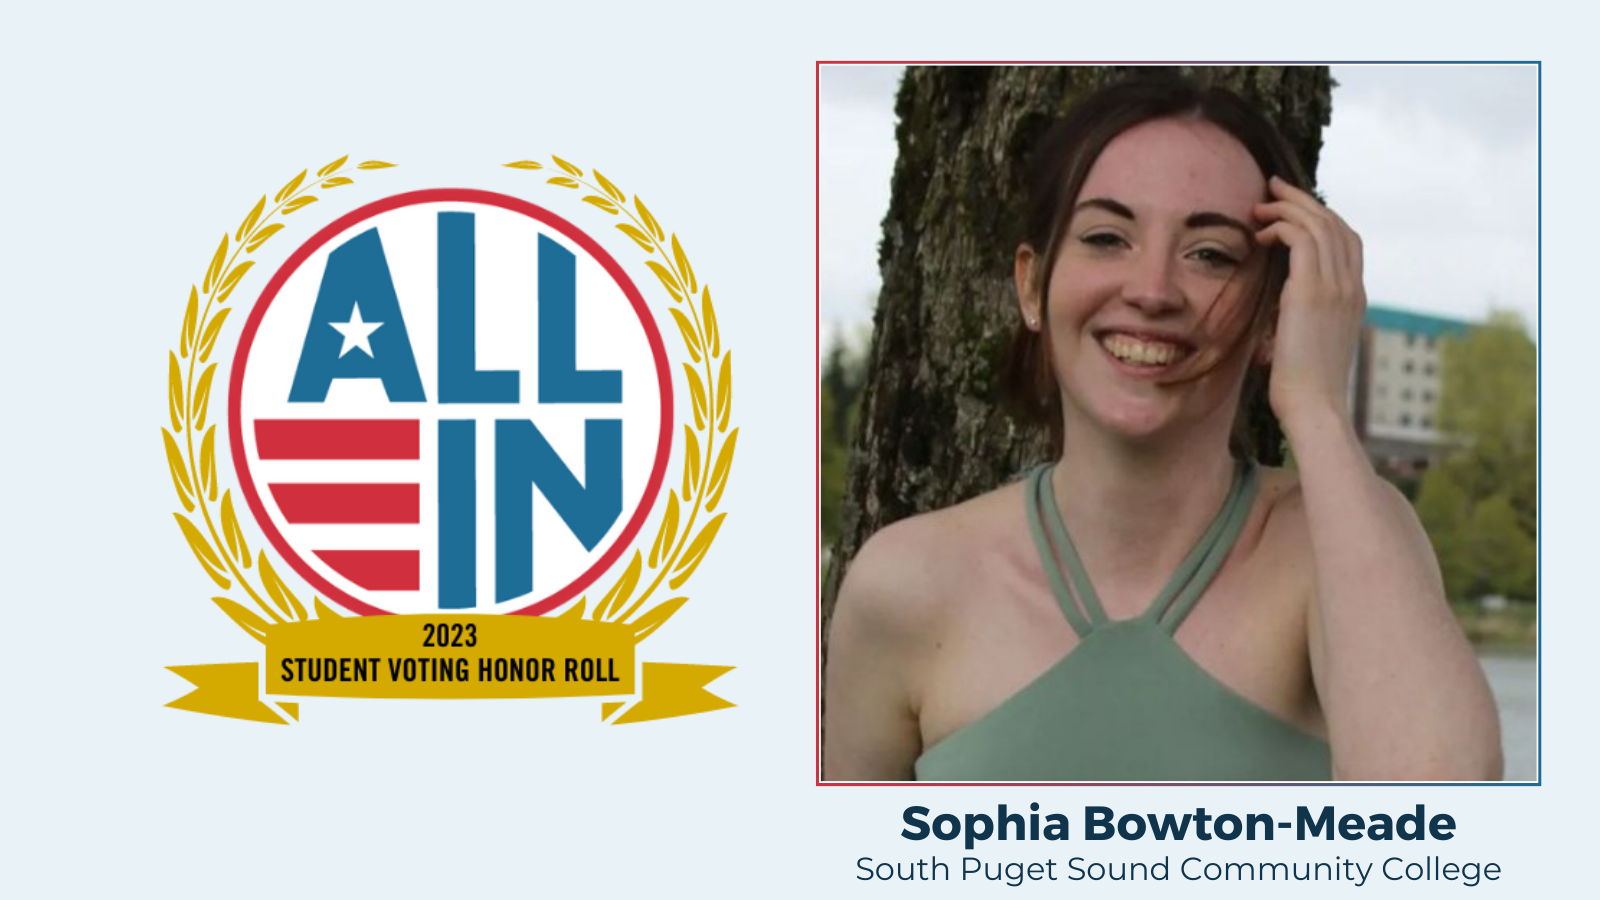 ALL IN 2023 Student Voting Honor Roll Sophia Bowton-Meade